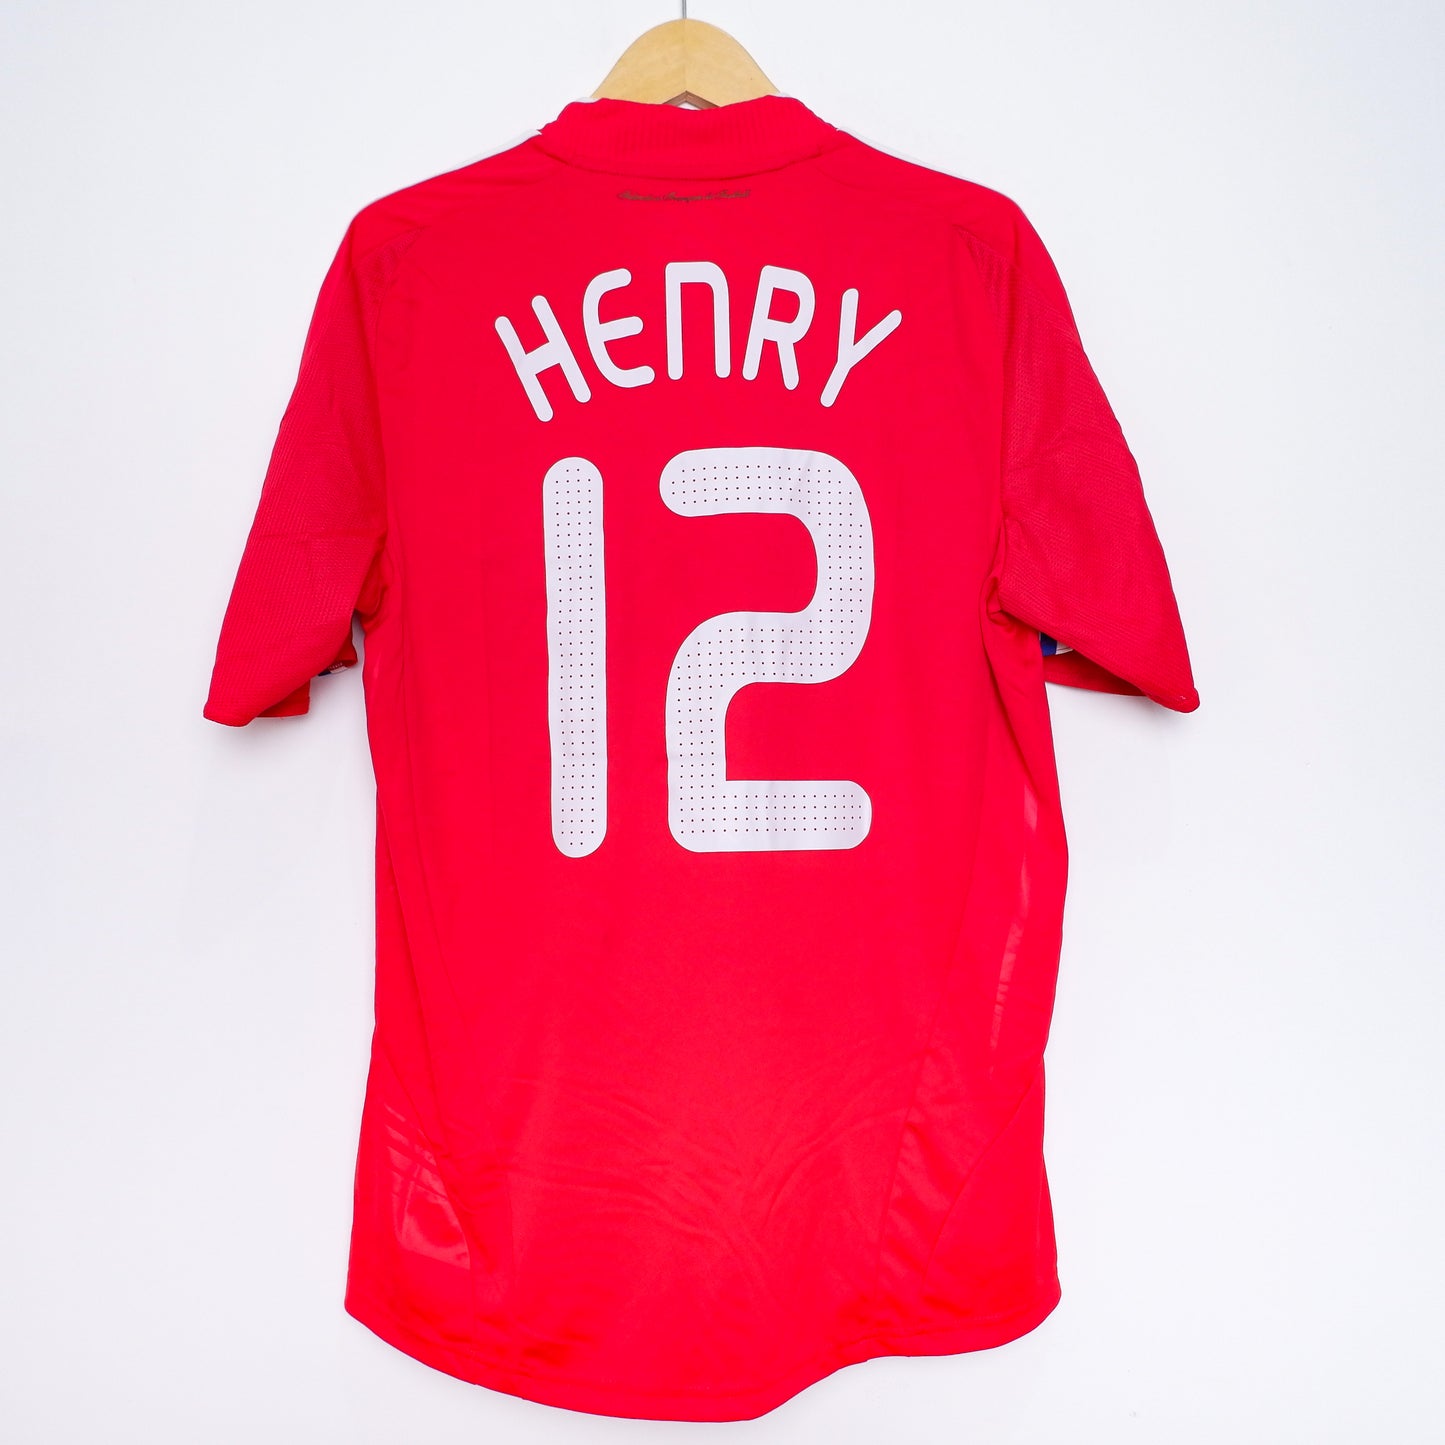 Authentic France 2008 Away - Thierry Henry #12 Size M